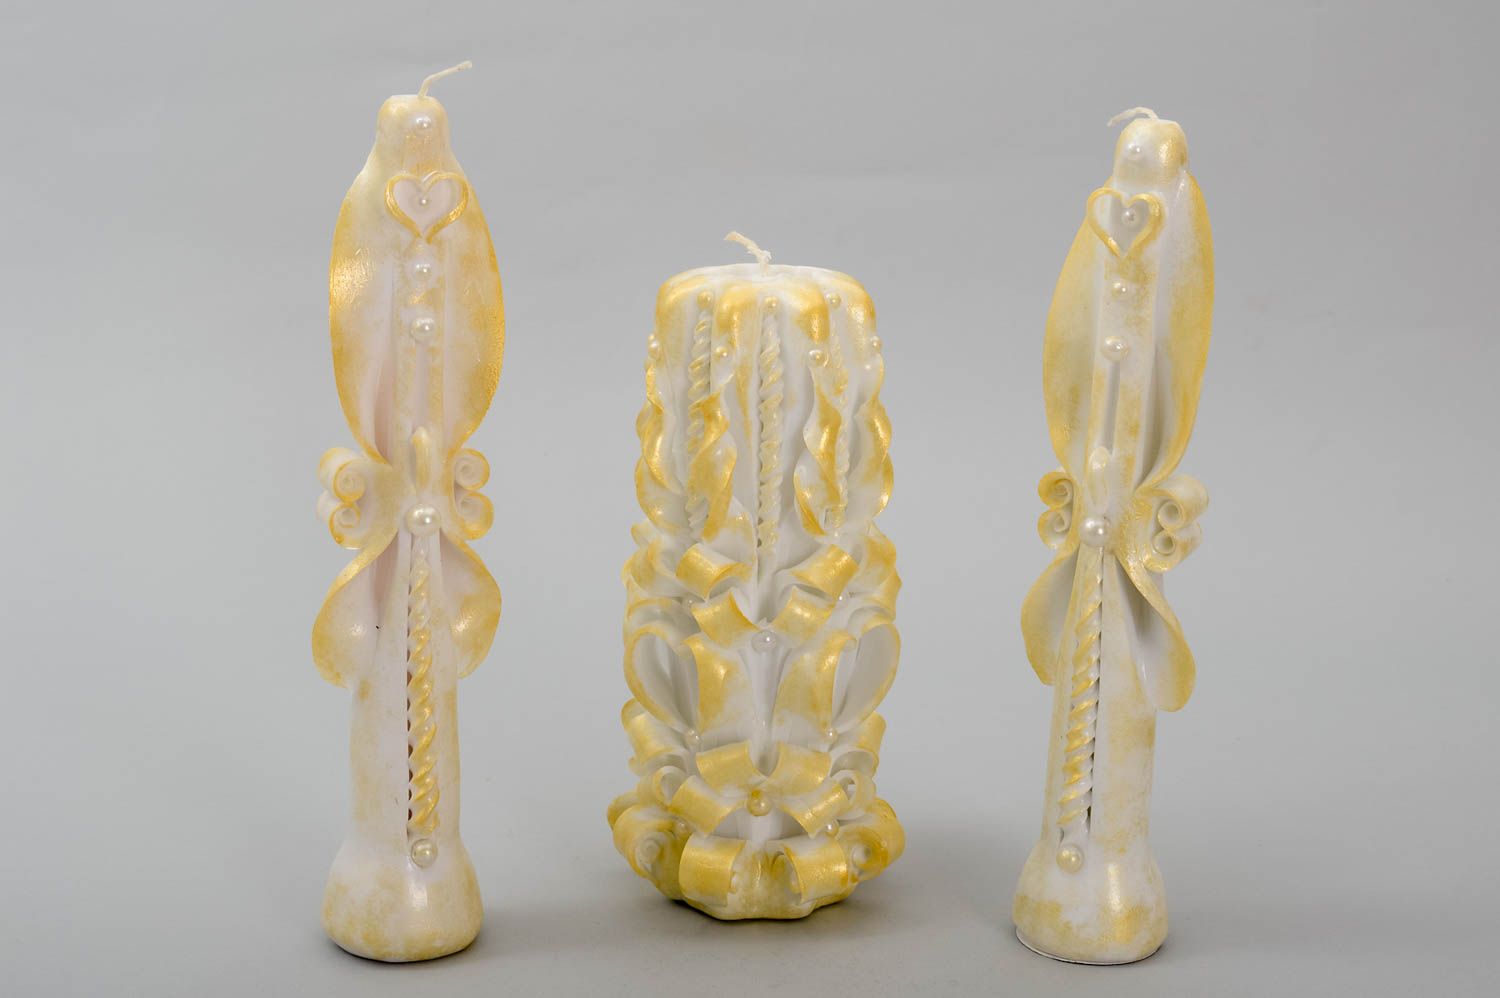 Unusual handmade decorative candles 3 wedding candles candle art room ideas photo 5